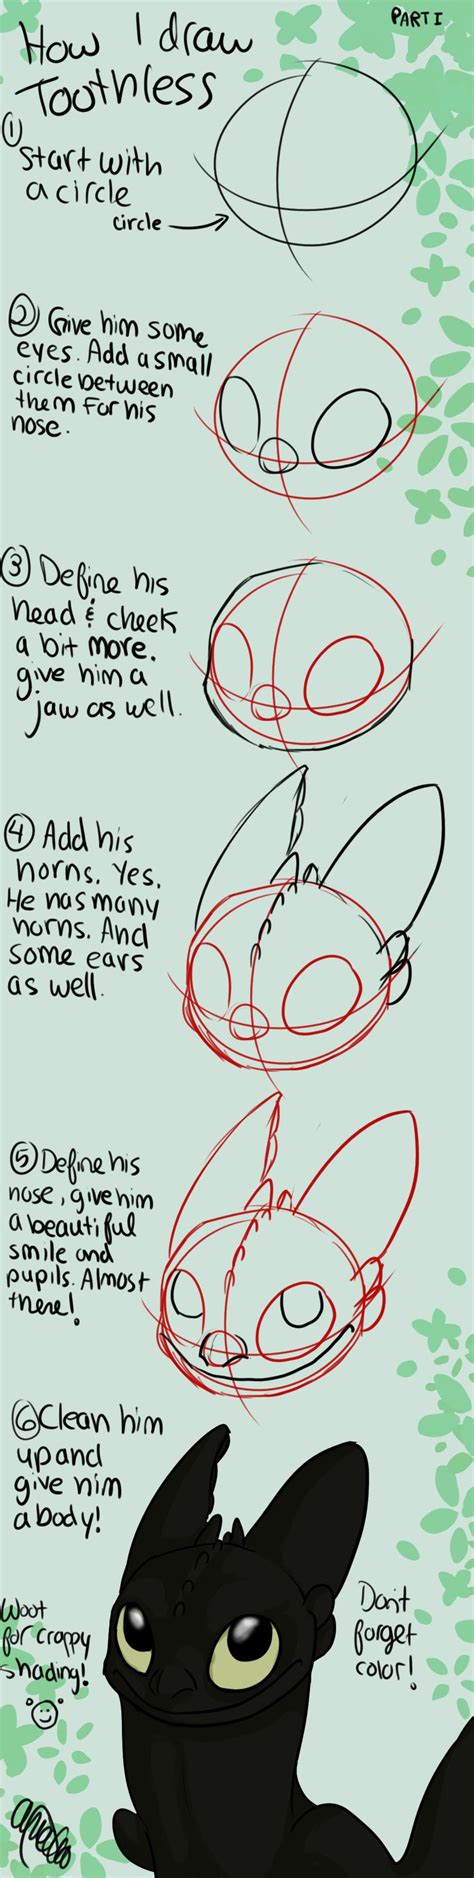 How To Draw Toothless Tutorial By Spiritwollf On Deviantart Toothless